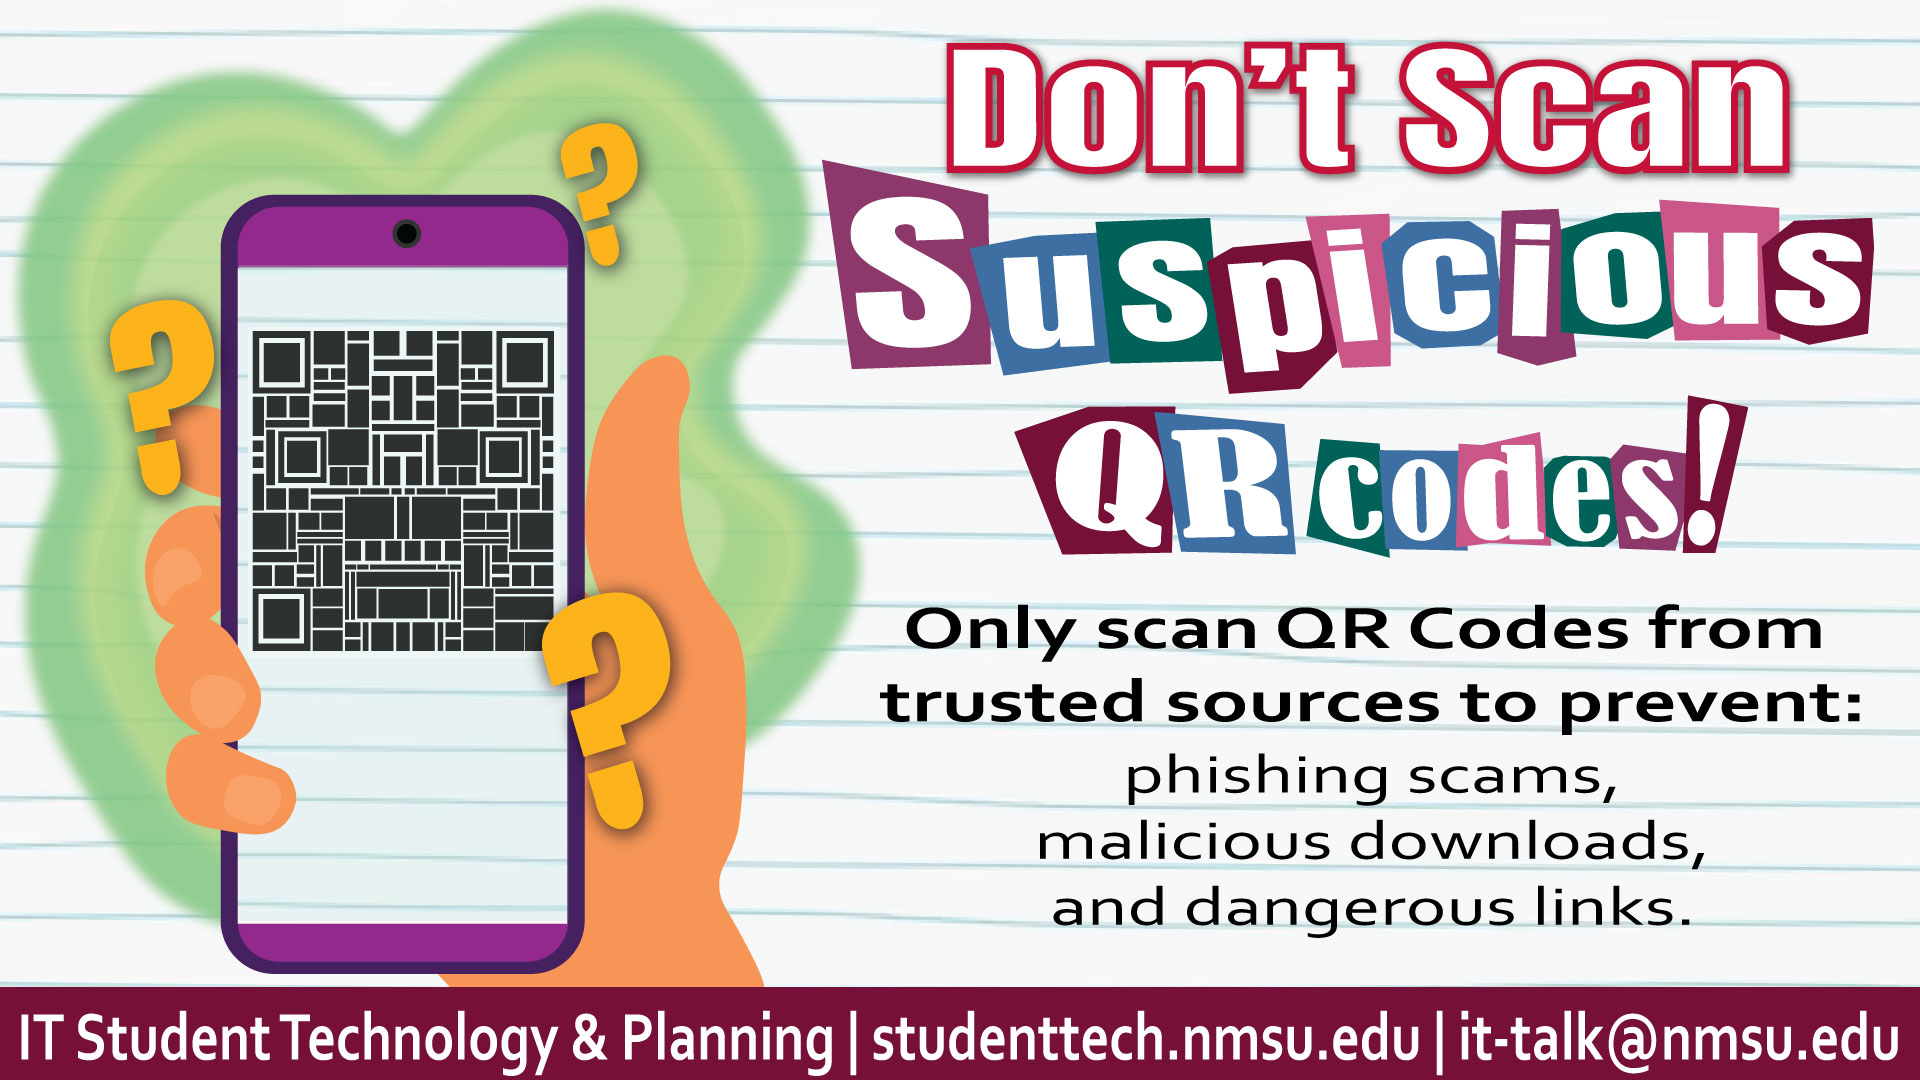 Don't scan suspicious QR codes! Only scan QR codes from trusted sources to prevent phishing scams, malicious downloads, and dangerous links.